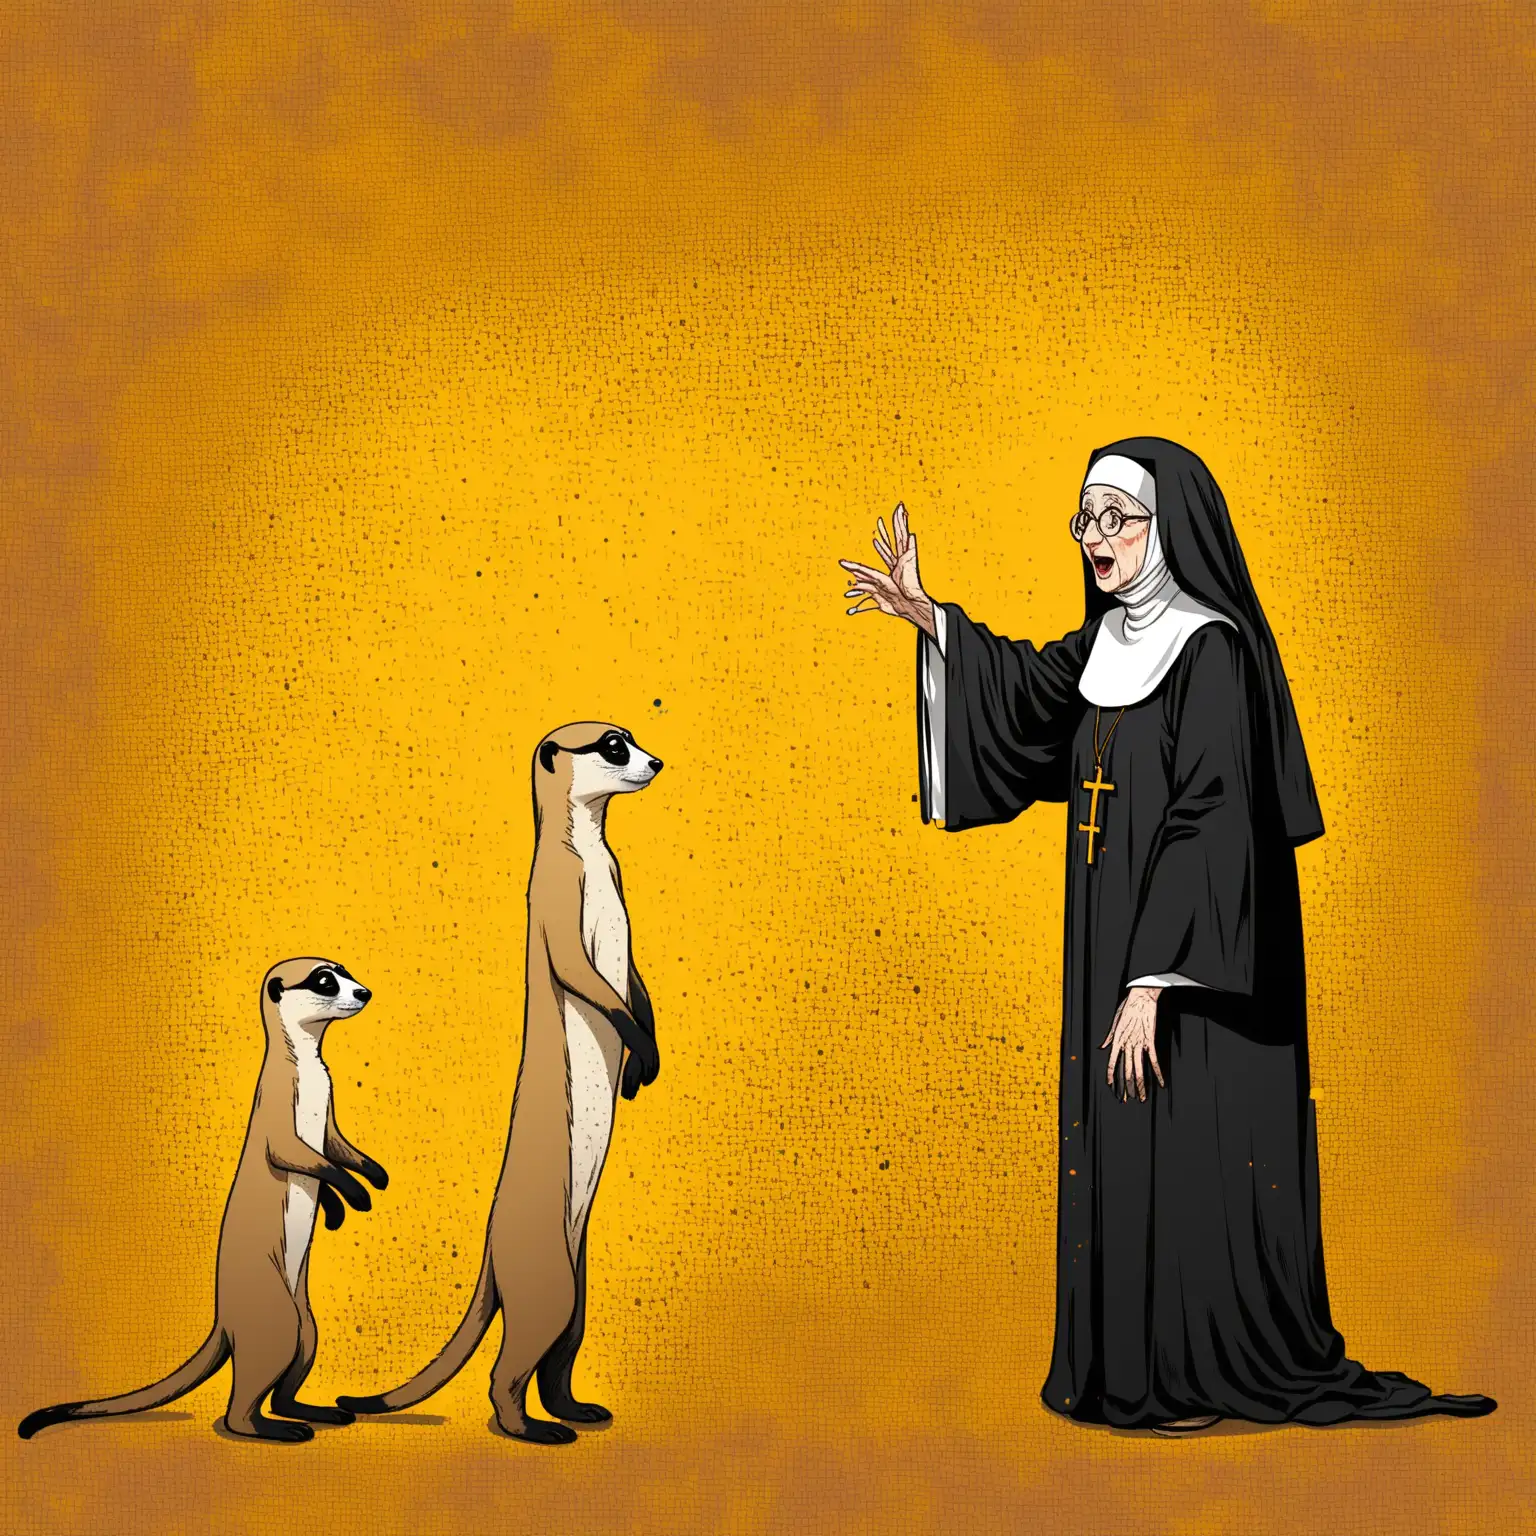 crazy old Nun with one large meercat playing tricks STYLE OF KUSTAZ KLIMT AND JACKSON POLLOCK no cross